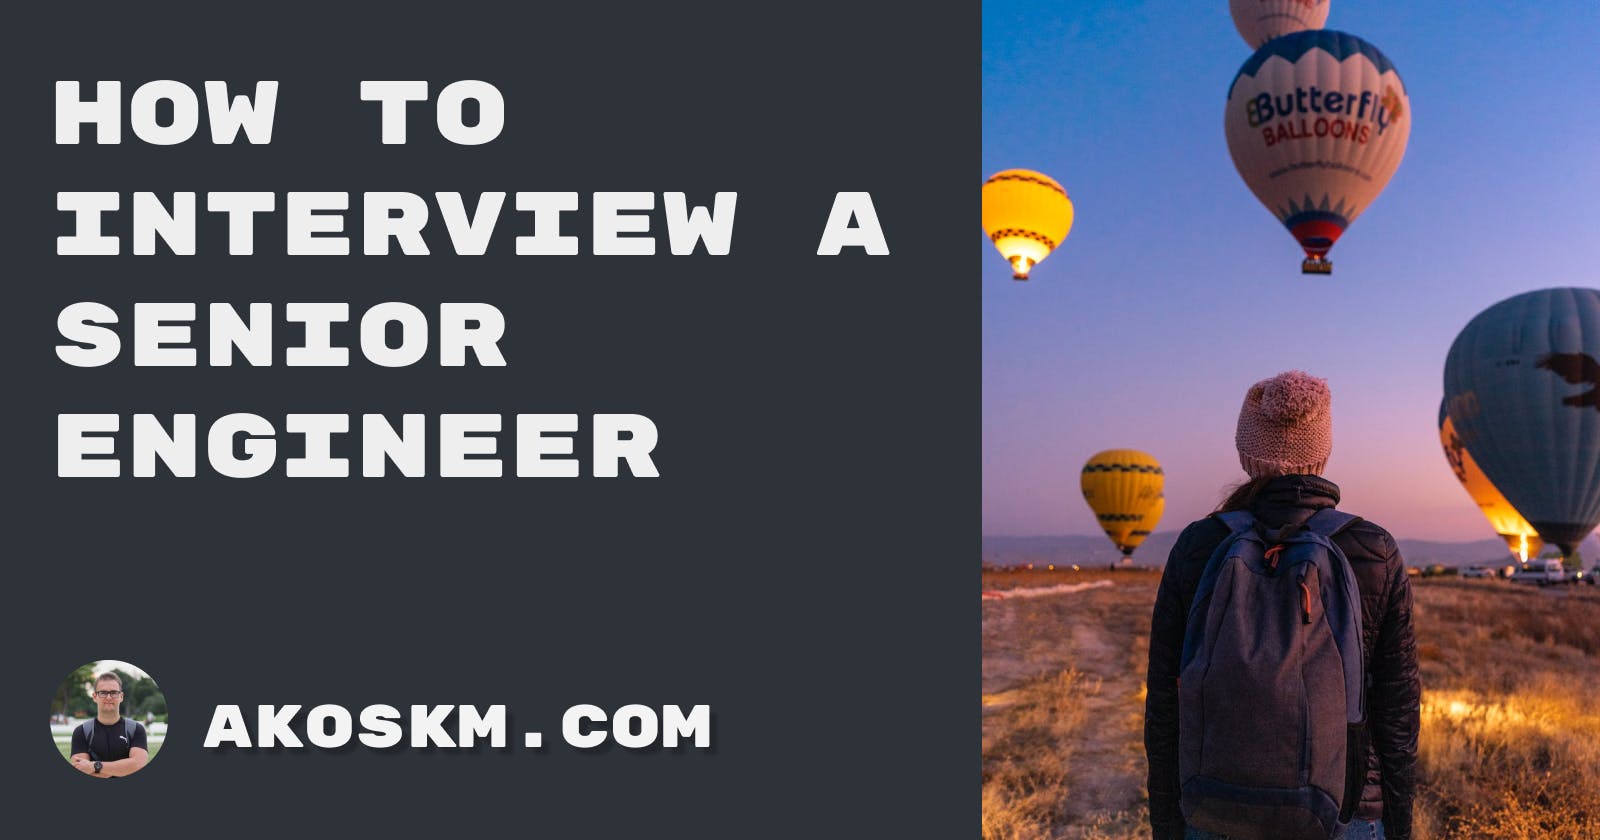 How to Interview a Senior Engineer